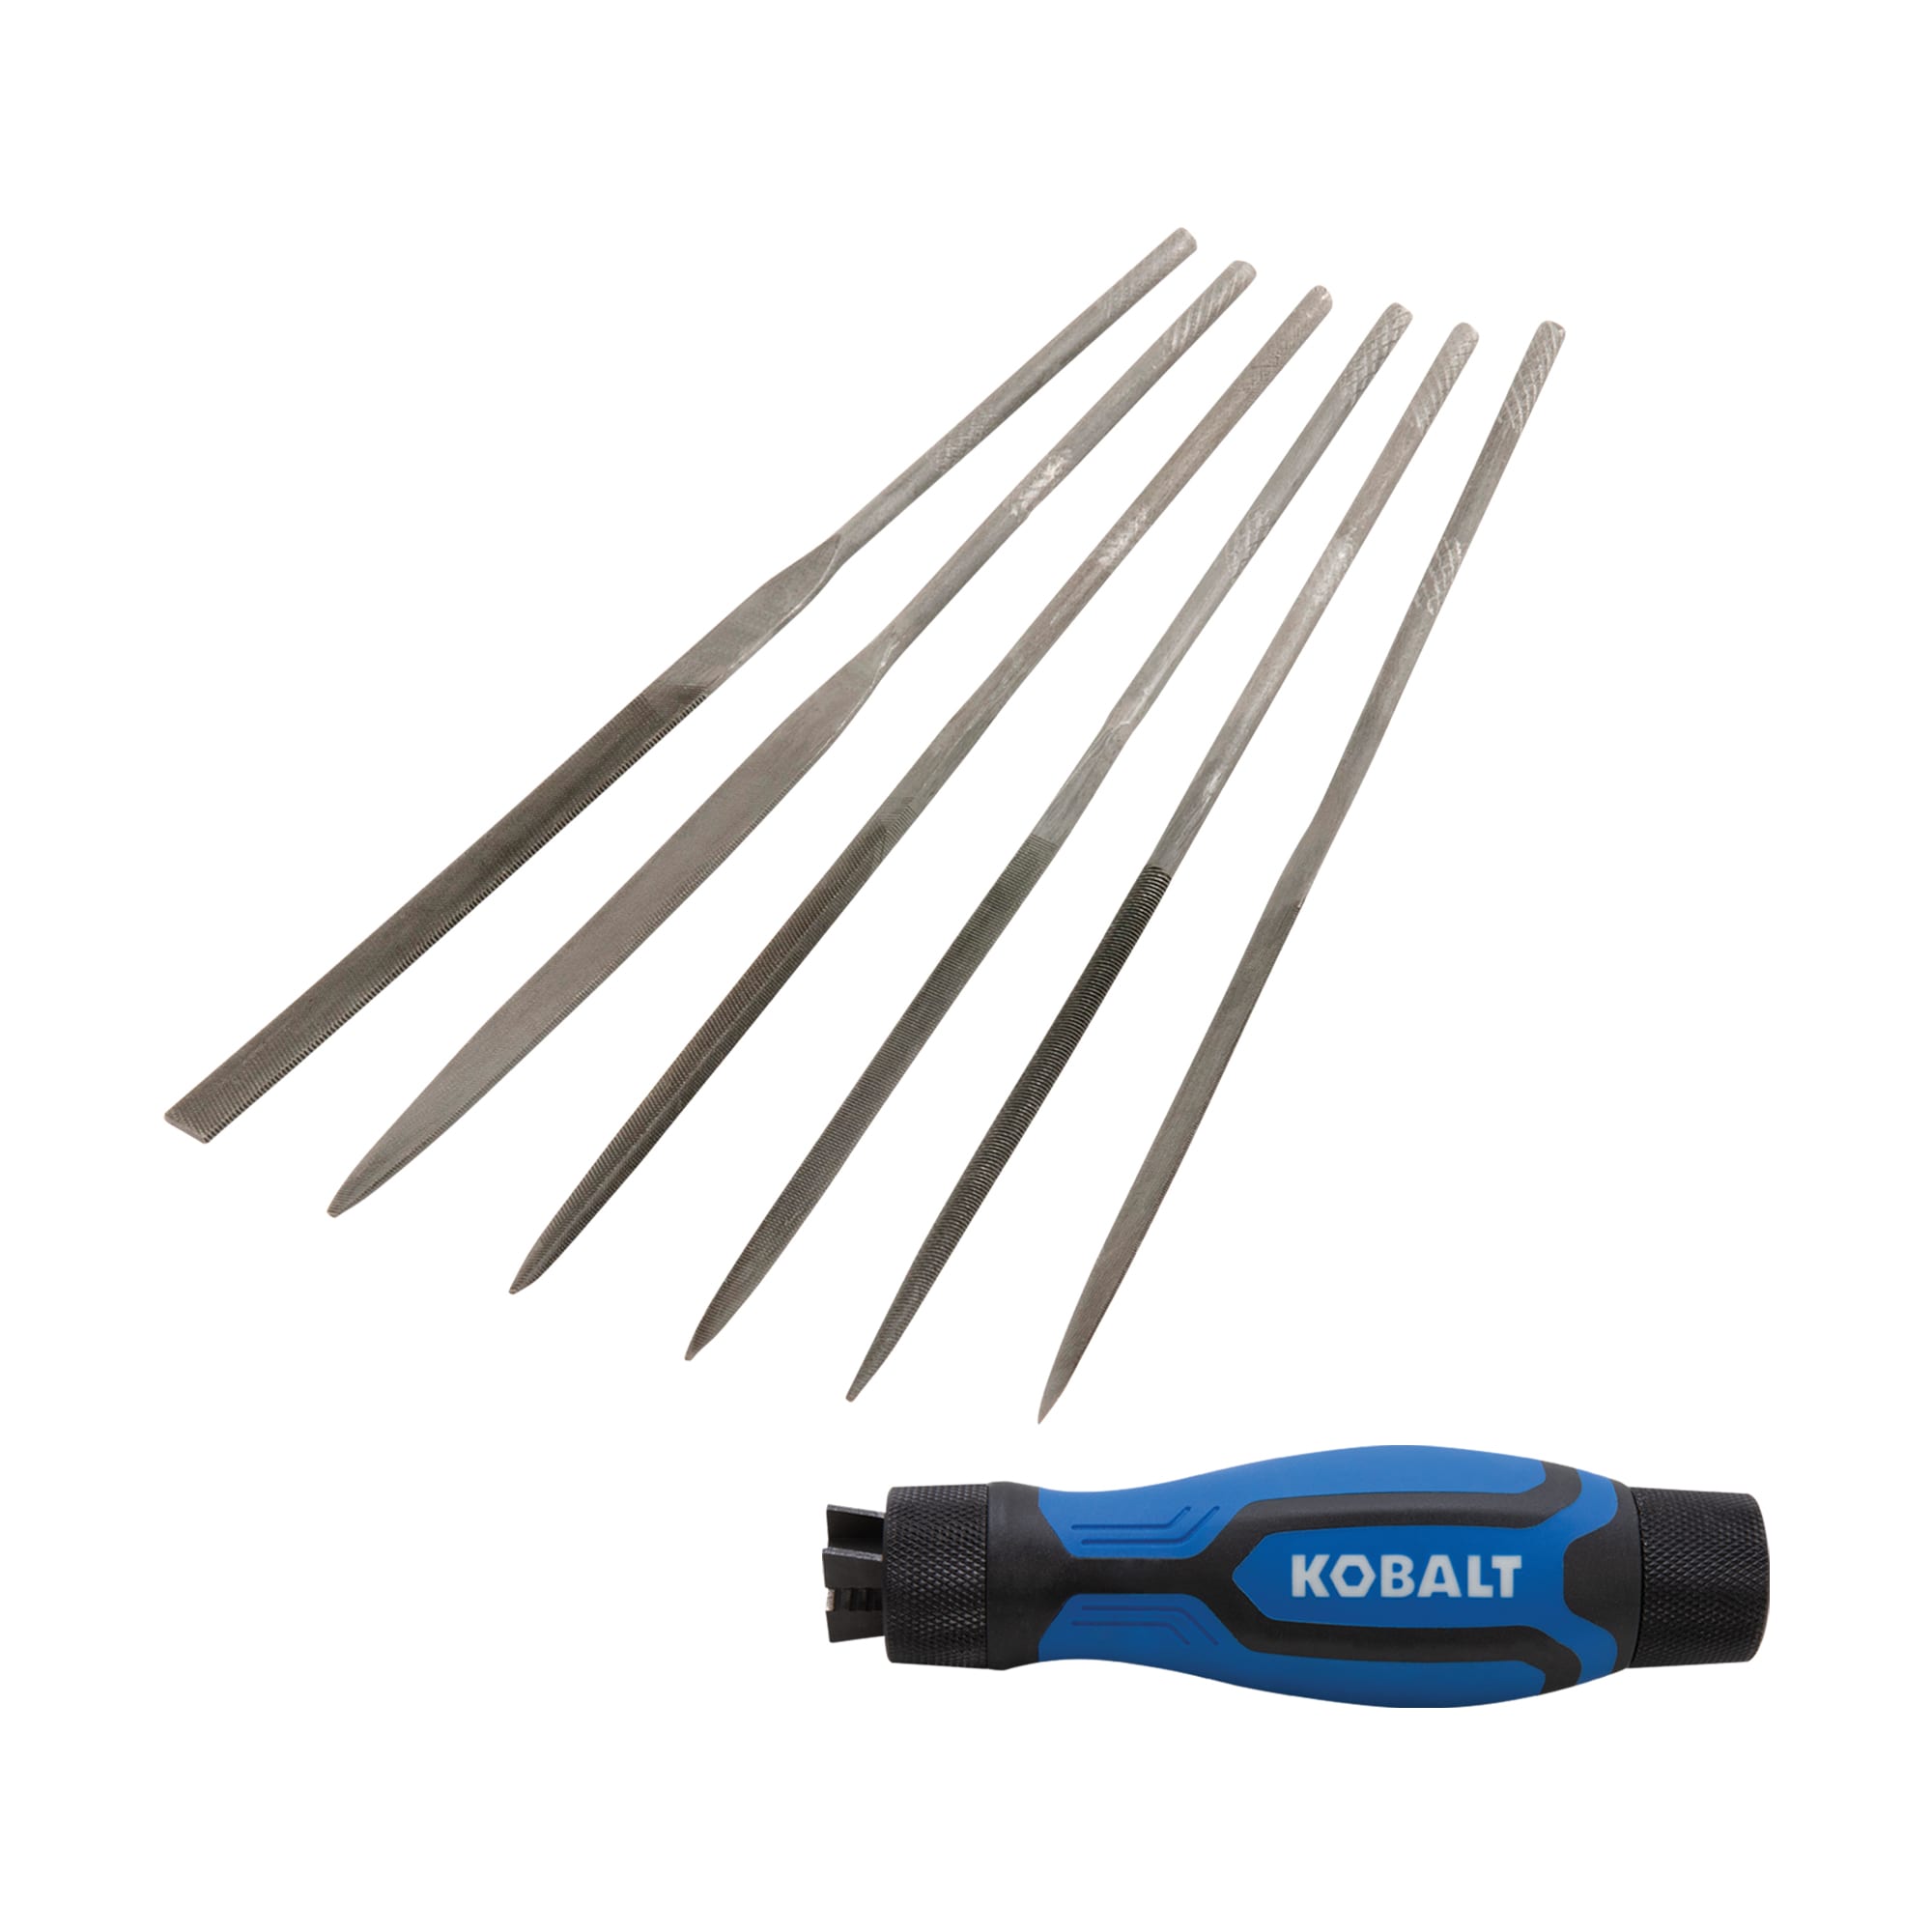 Kobalt 5.5-in. Single-cut Smooth File Set with File Handle File